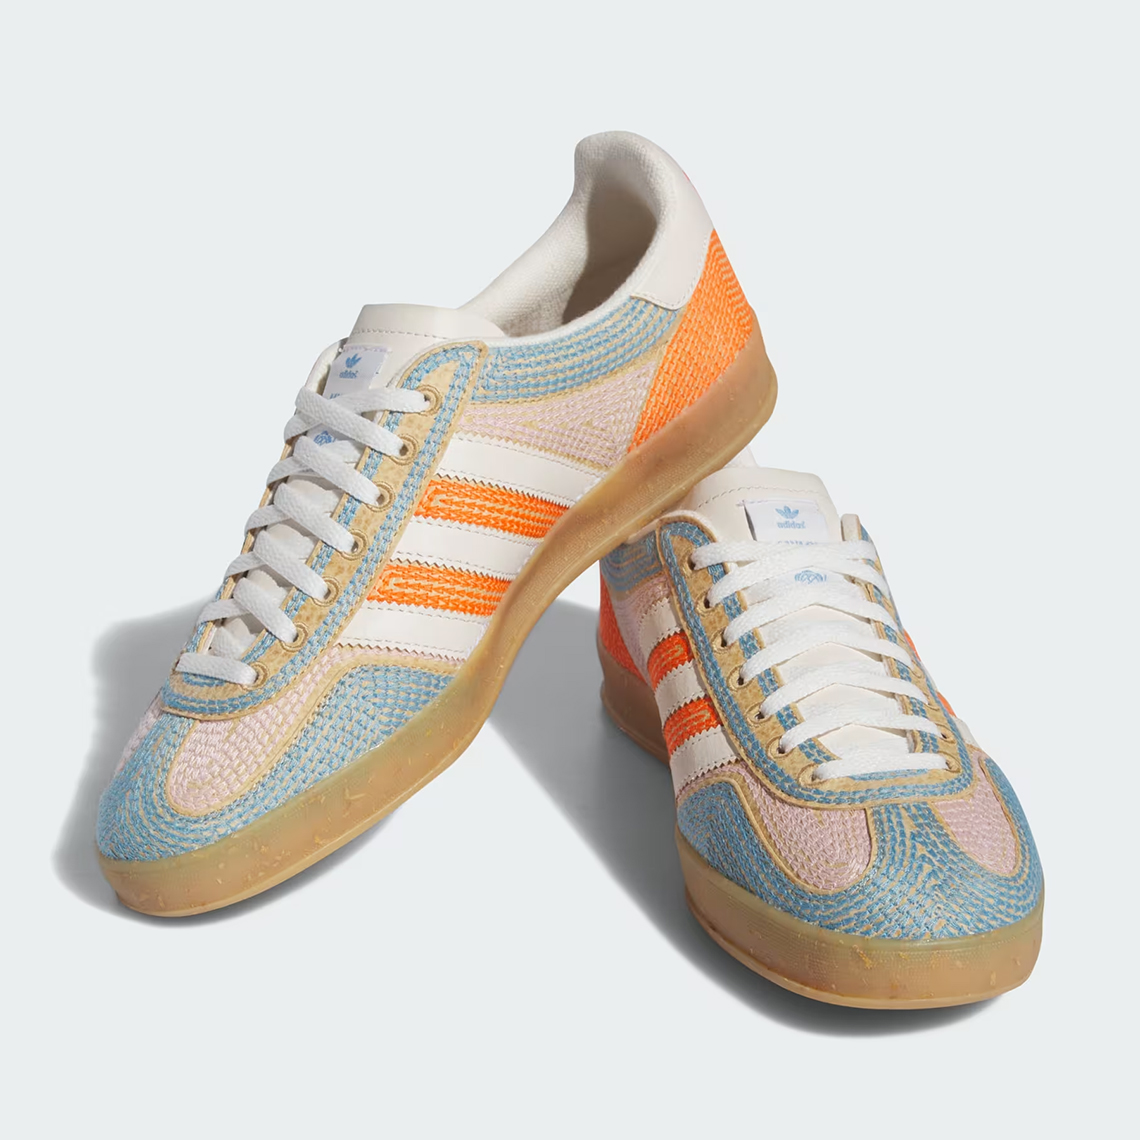 Sean Wotherspoon Adidas Gazelle Indoor Mylo Id2686 Release Date 6